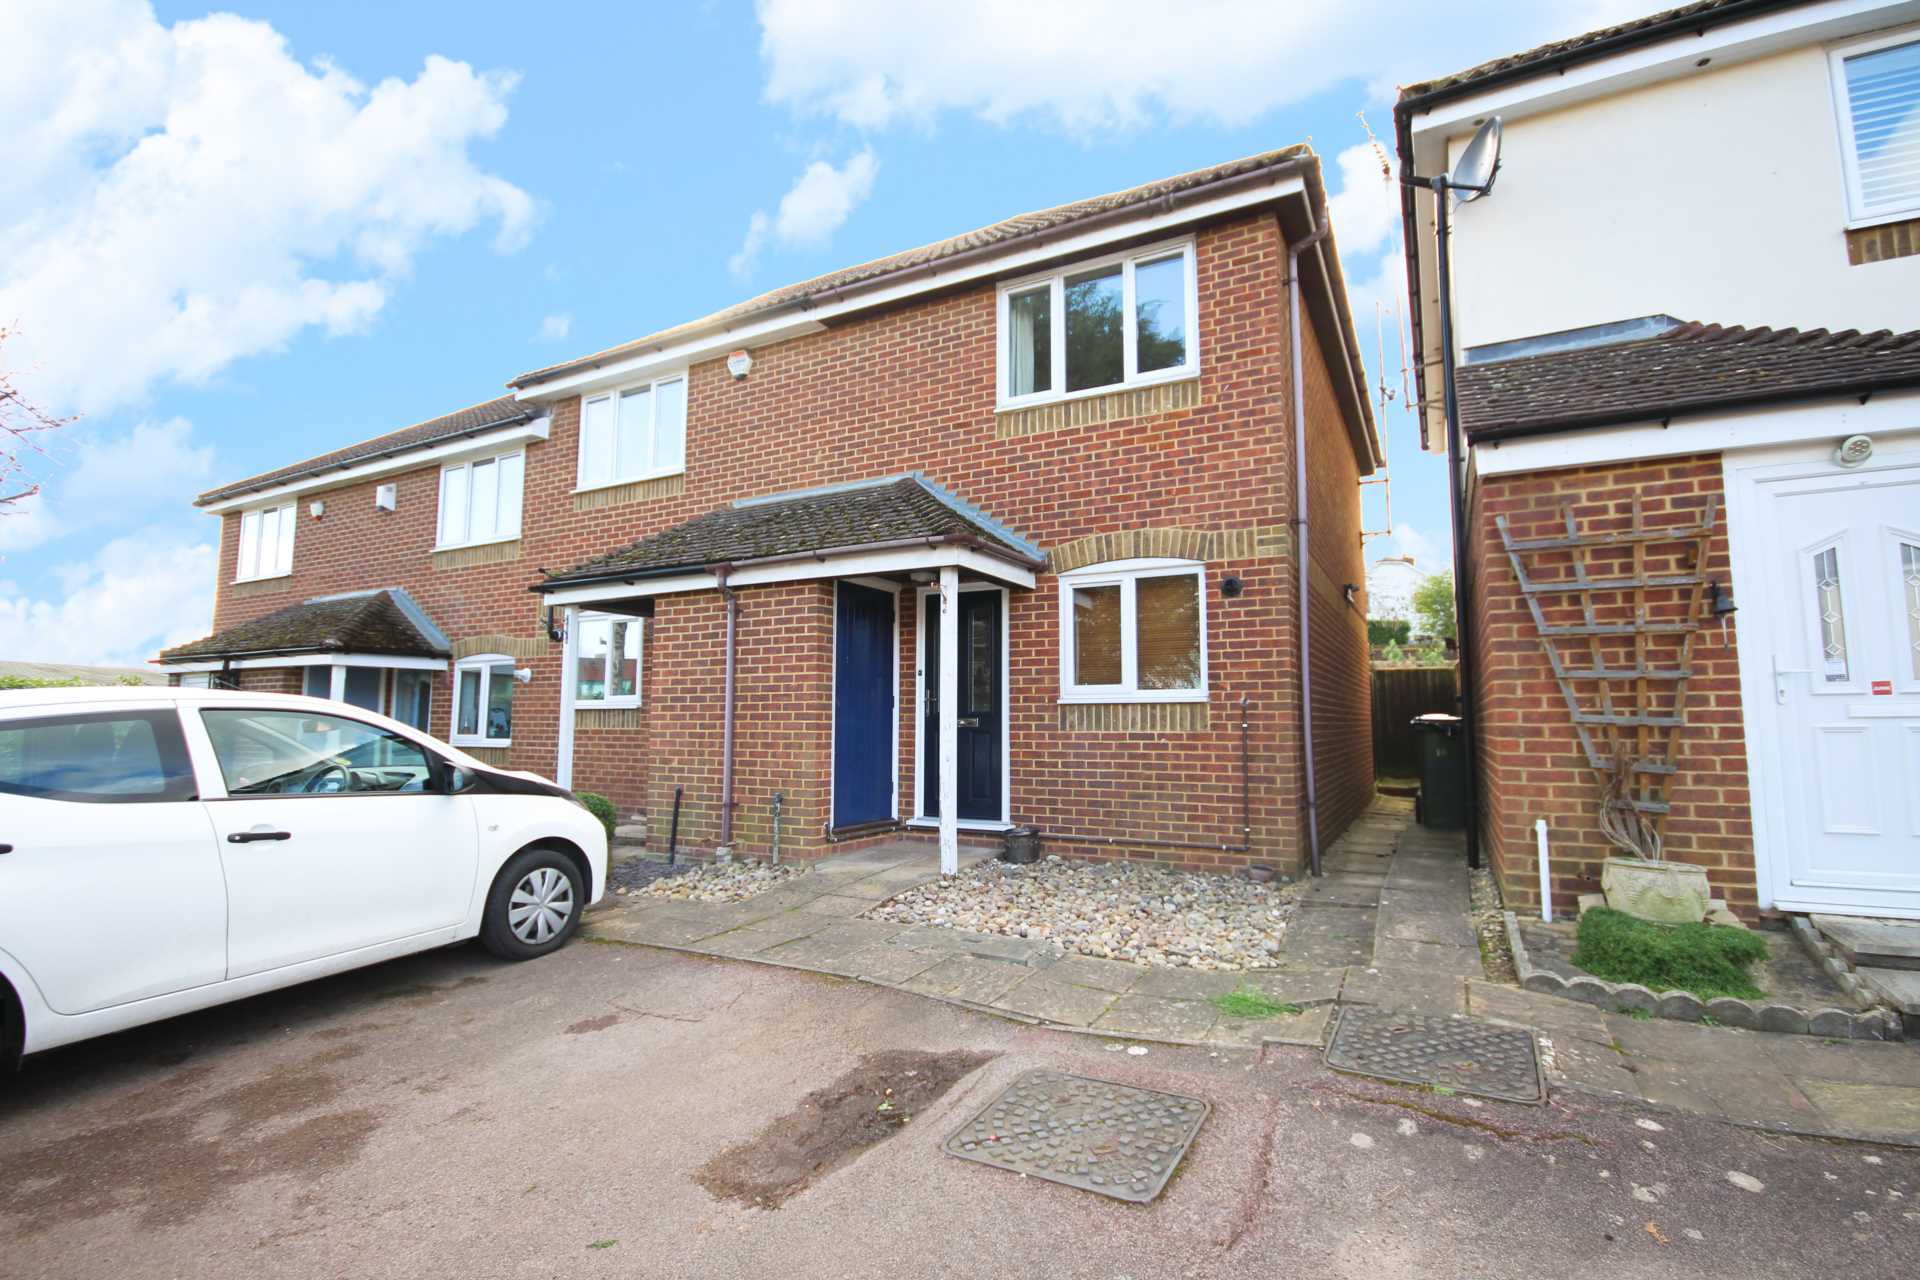 2 bed Semi-Detached House for rent in Bracknell. From Sears Property - Bracknell